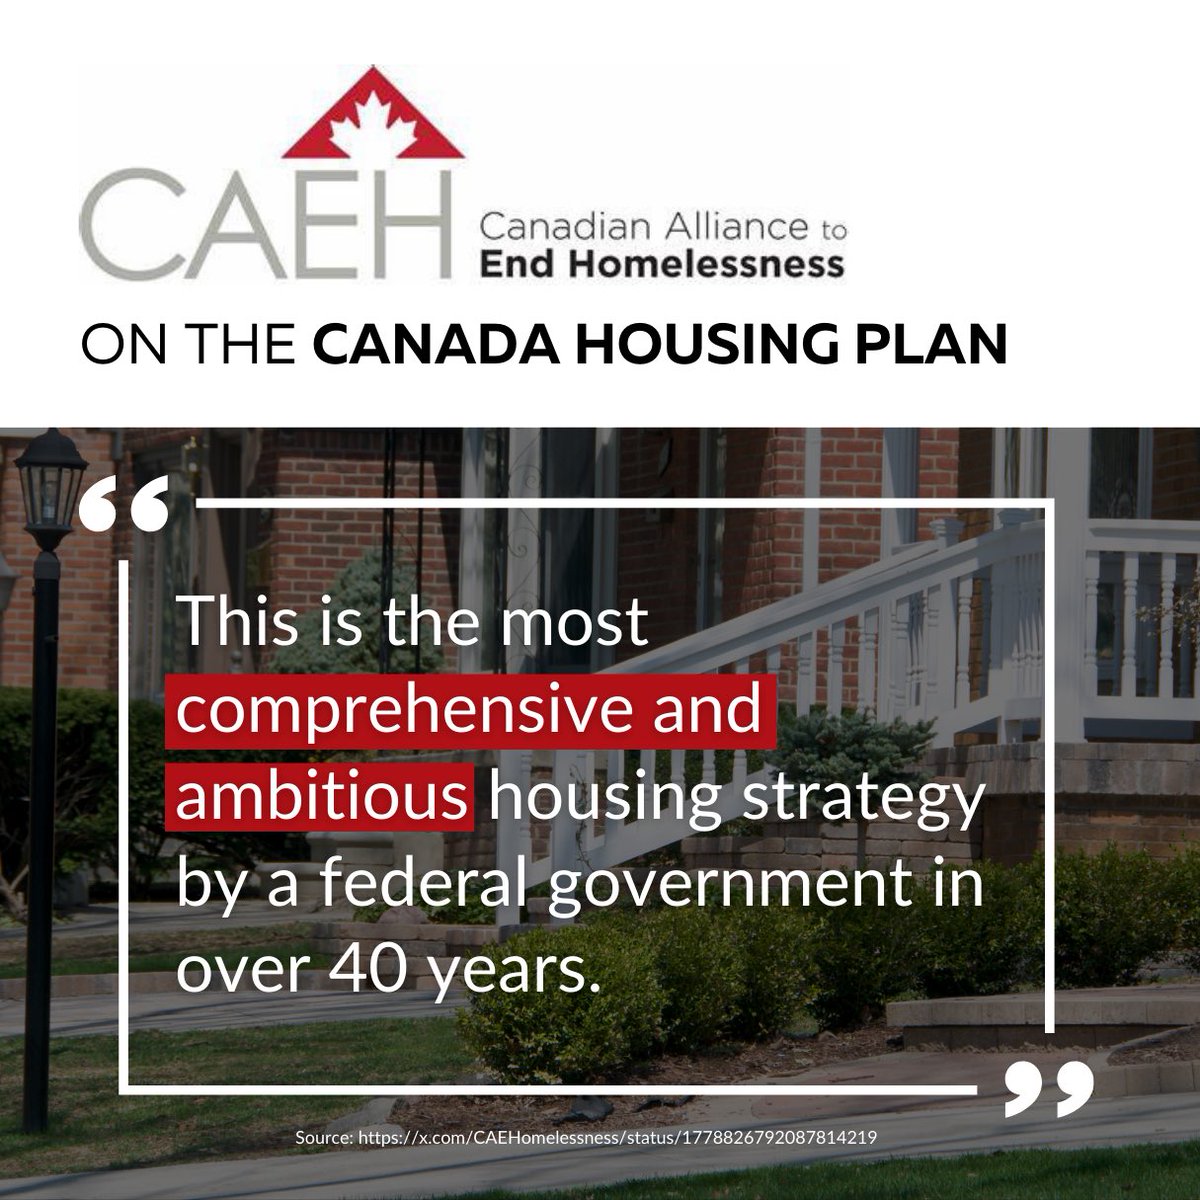 Affordable housing champions like @CAEHomelessness understand the level of ambition we need to get more homes built and solve the housing crisis 🏡 Our plan will unlock 3.9 million new homes by 2031 through serious investments and partnerships right across the country.